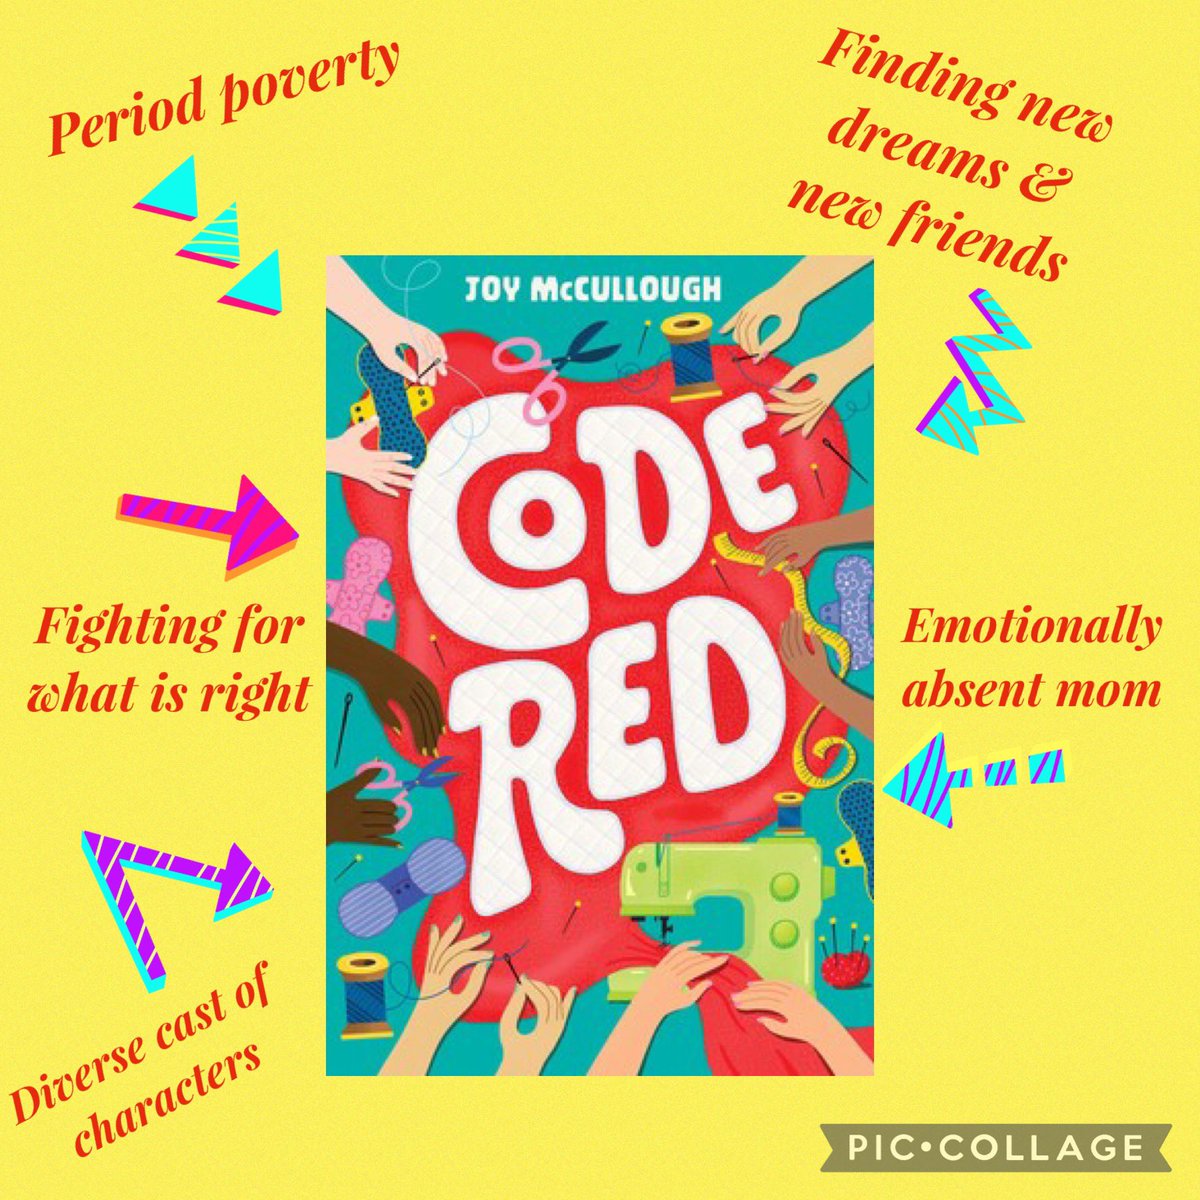 Eden’s dream didn’t die, it changed. From gymnastic phenom to social activist against period poverty, finding a new way to fight and a new way to win. (p. 234 paraphrased) @JMCwrites CODE RED will make readers think while they enjoy a great read. @SSEdLib #BookAllies